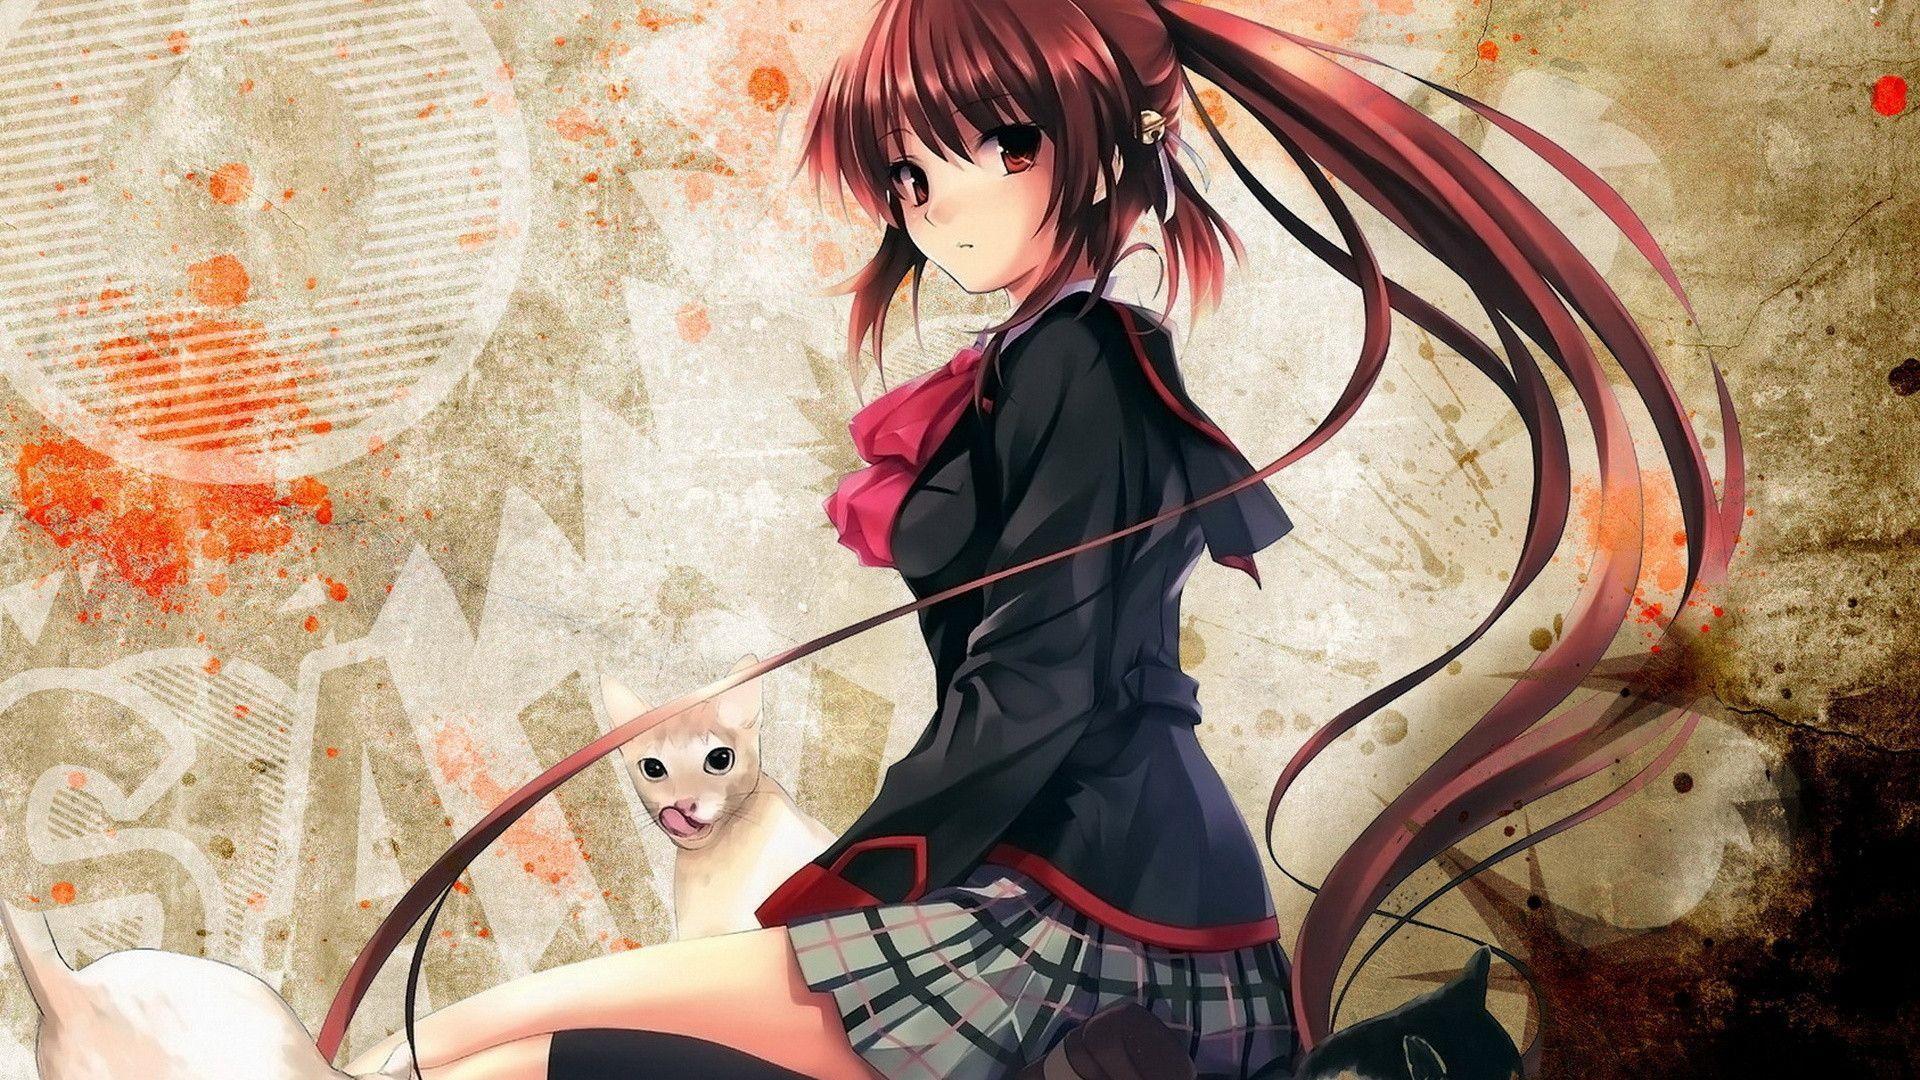 Anime girl with cats Wallpaperx1080 resolution wallpaper